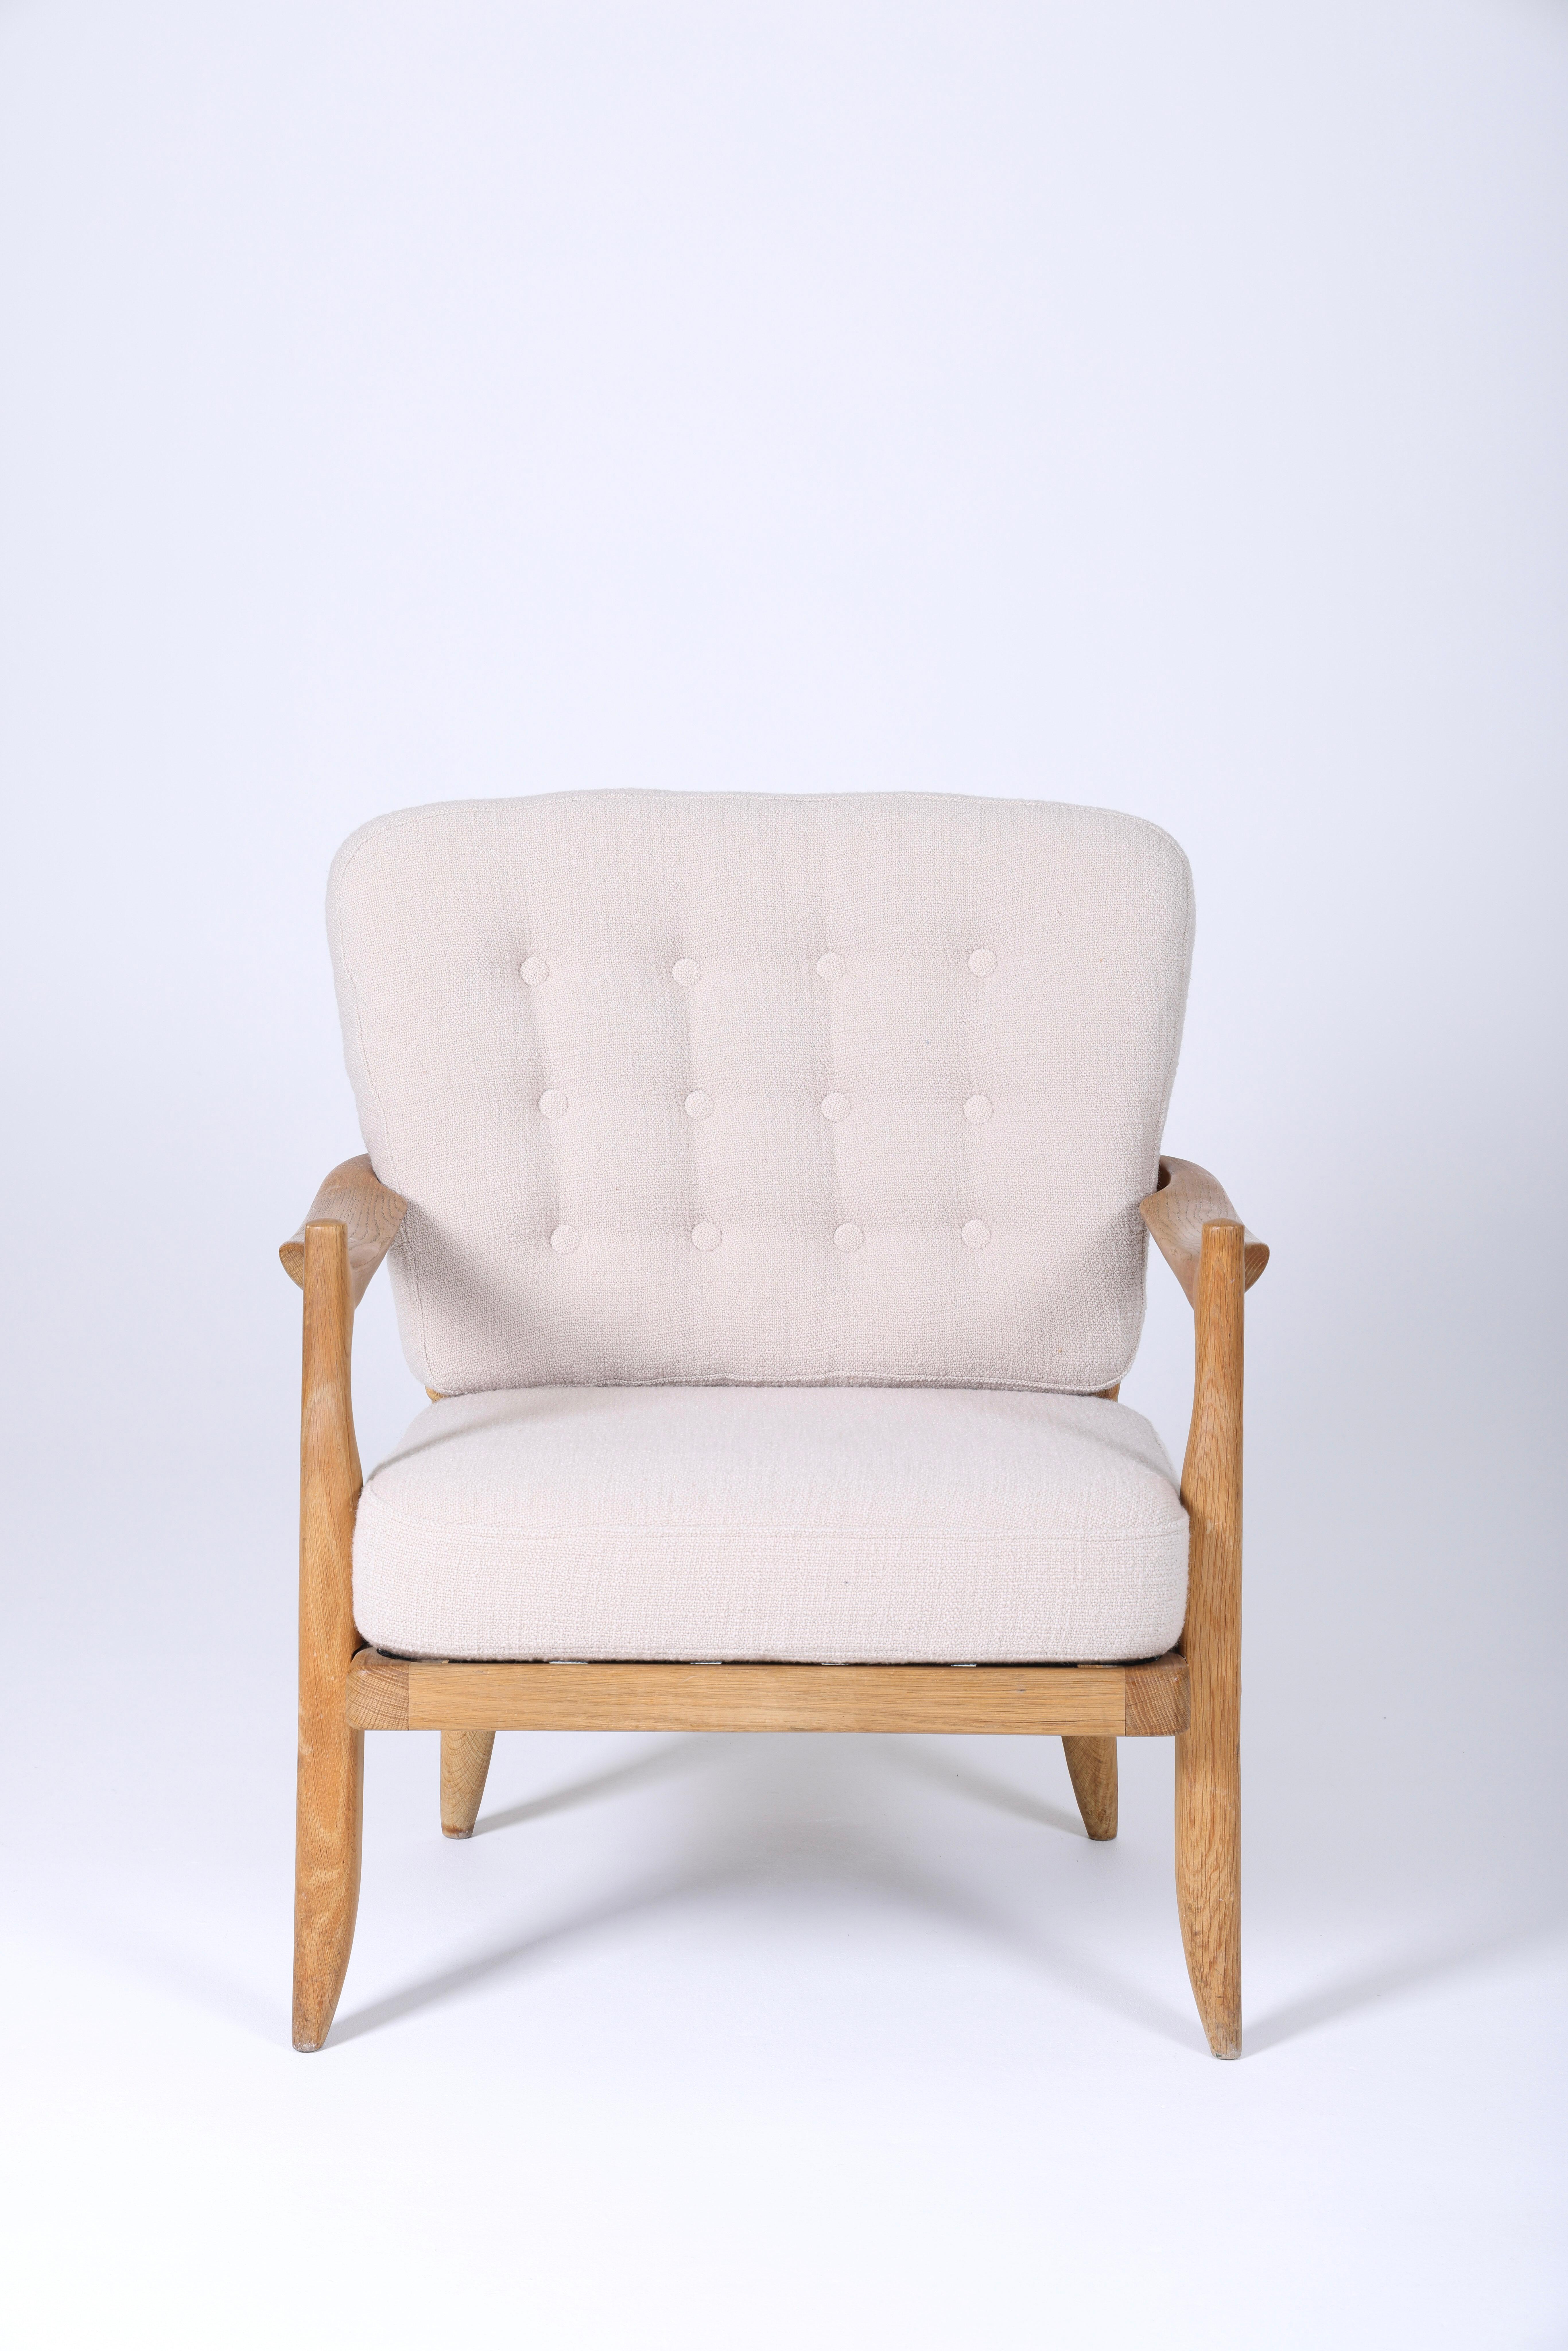 Tricoteuse armchair by Guillerme and Chambron, published by Votre Maison, from the year 1960. Oak frame, seat and backrest completely reupholstered with Dedar's Perfect Flower fabric. In very good condition.
LP585.